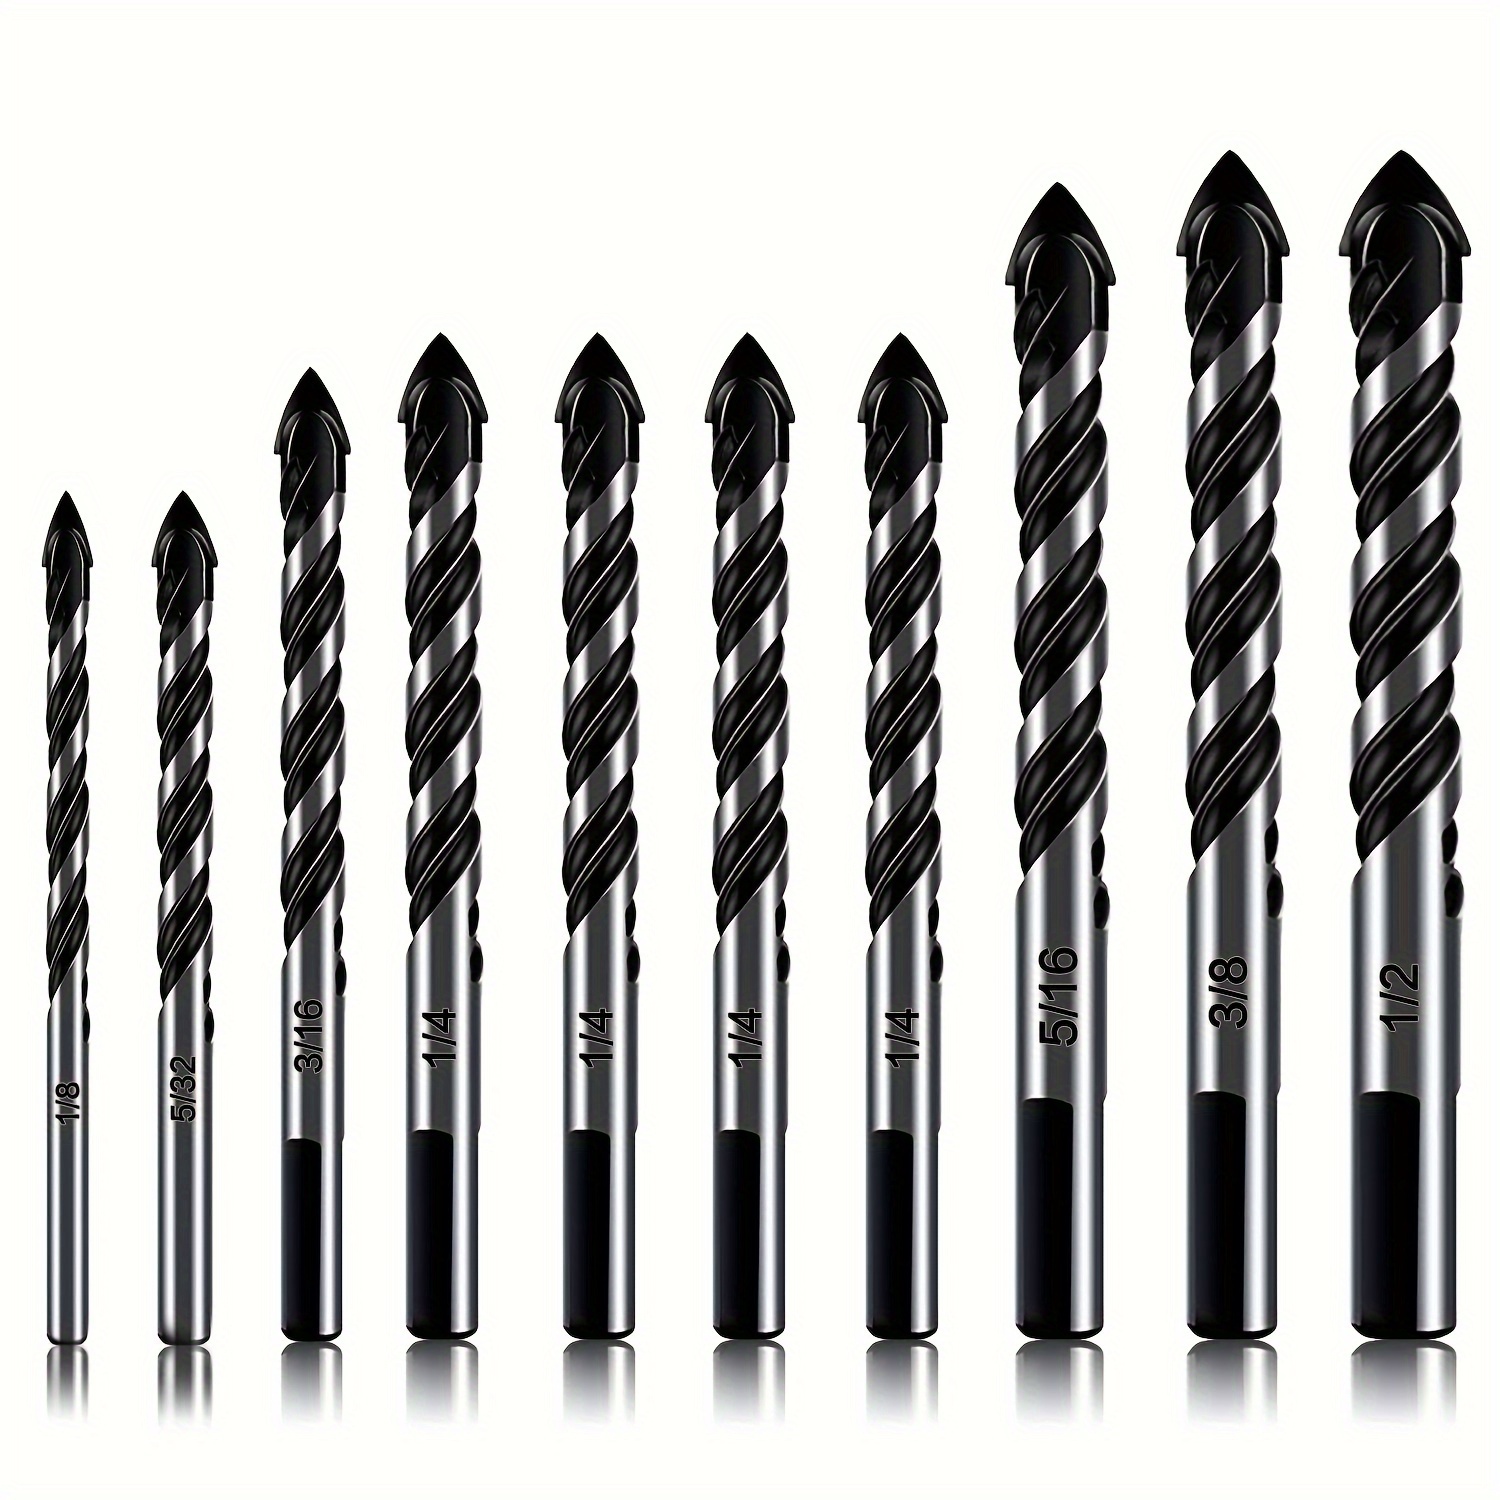 

Facoow Professional Masonry Drill Bit Set (10/12 Pcs) - Industrial Carbide Tips For Glass, Brick, Plastic, Cement, Wood, Tile & More, 1/8"-1/2" Shank